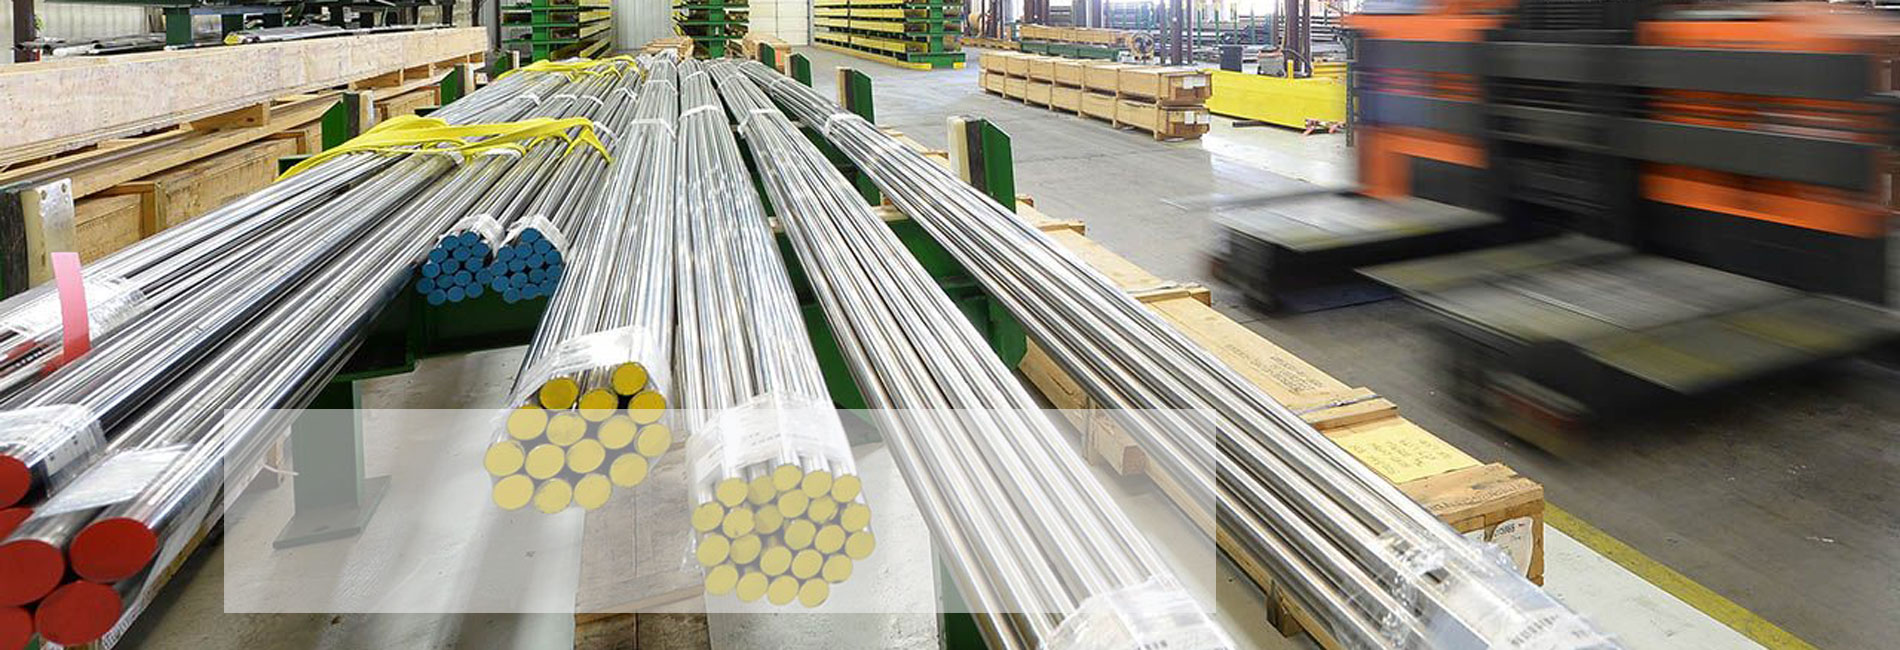 630-stainless-pipes-round-bar